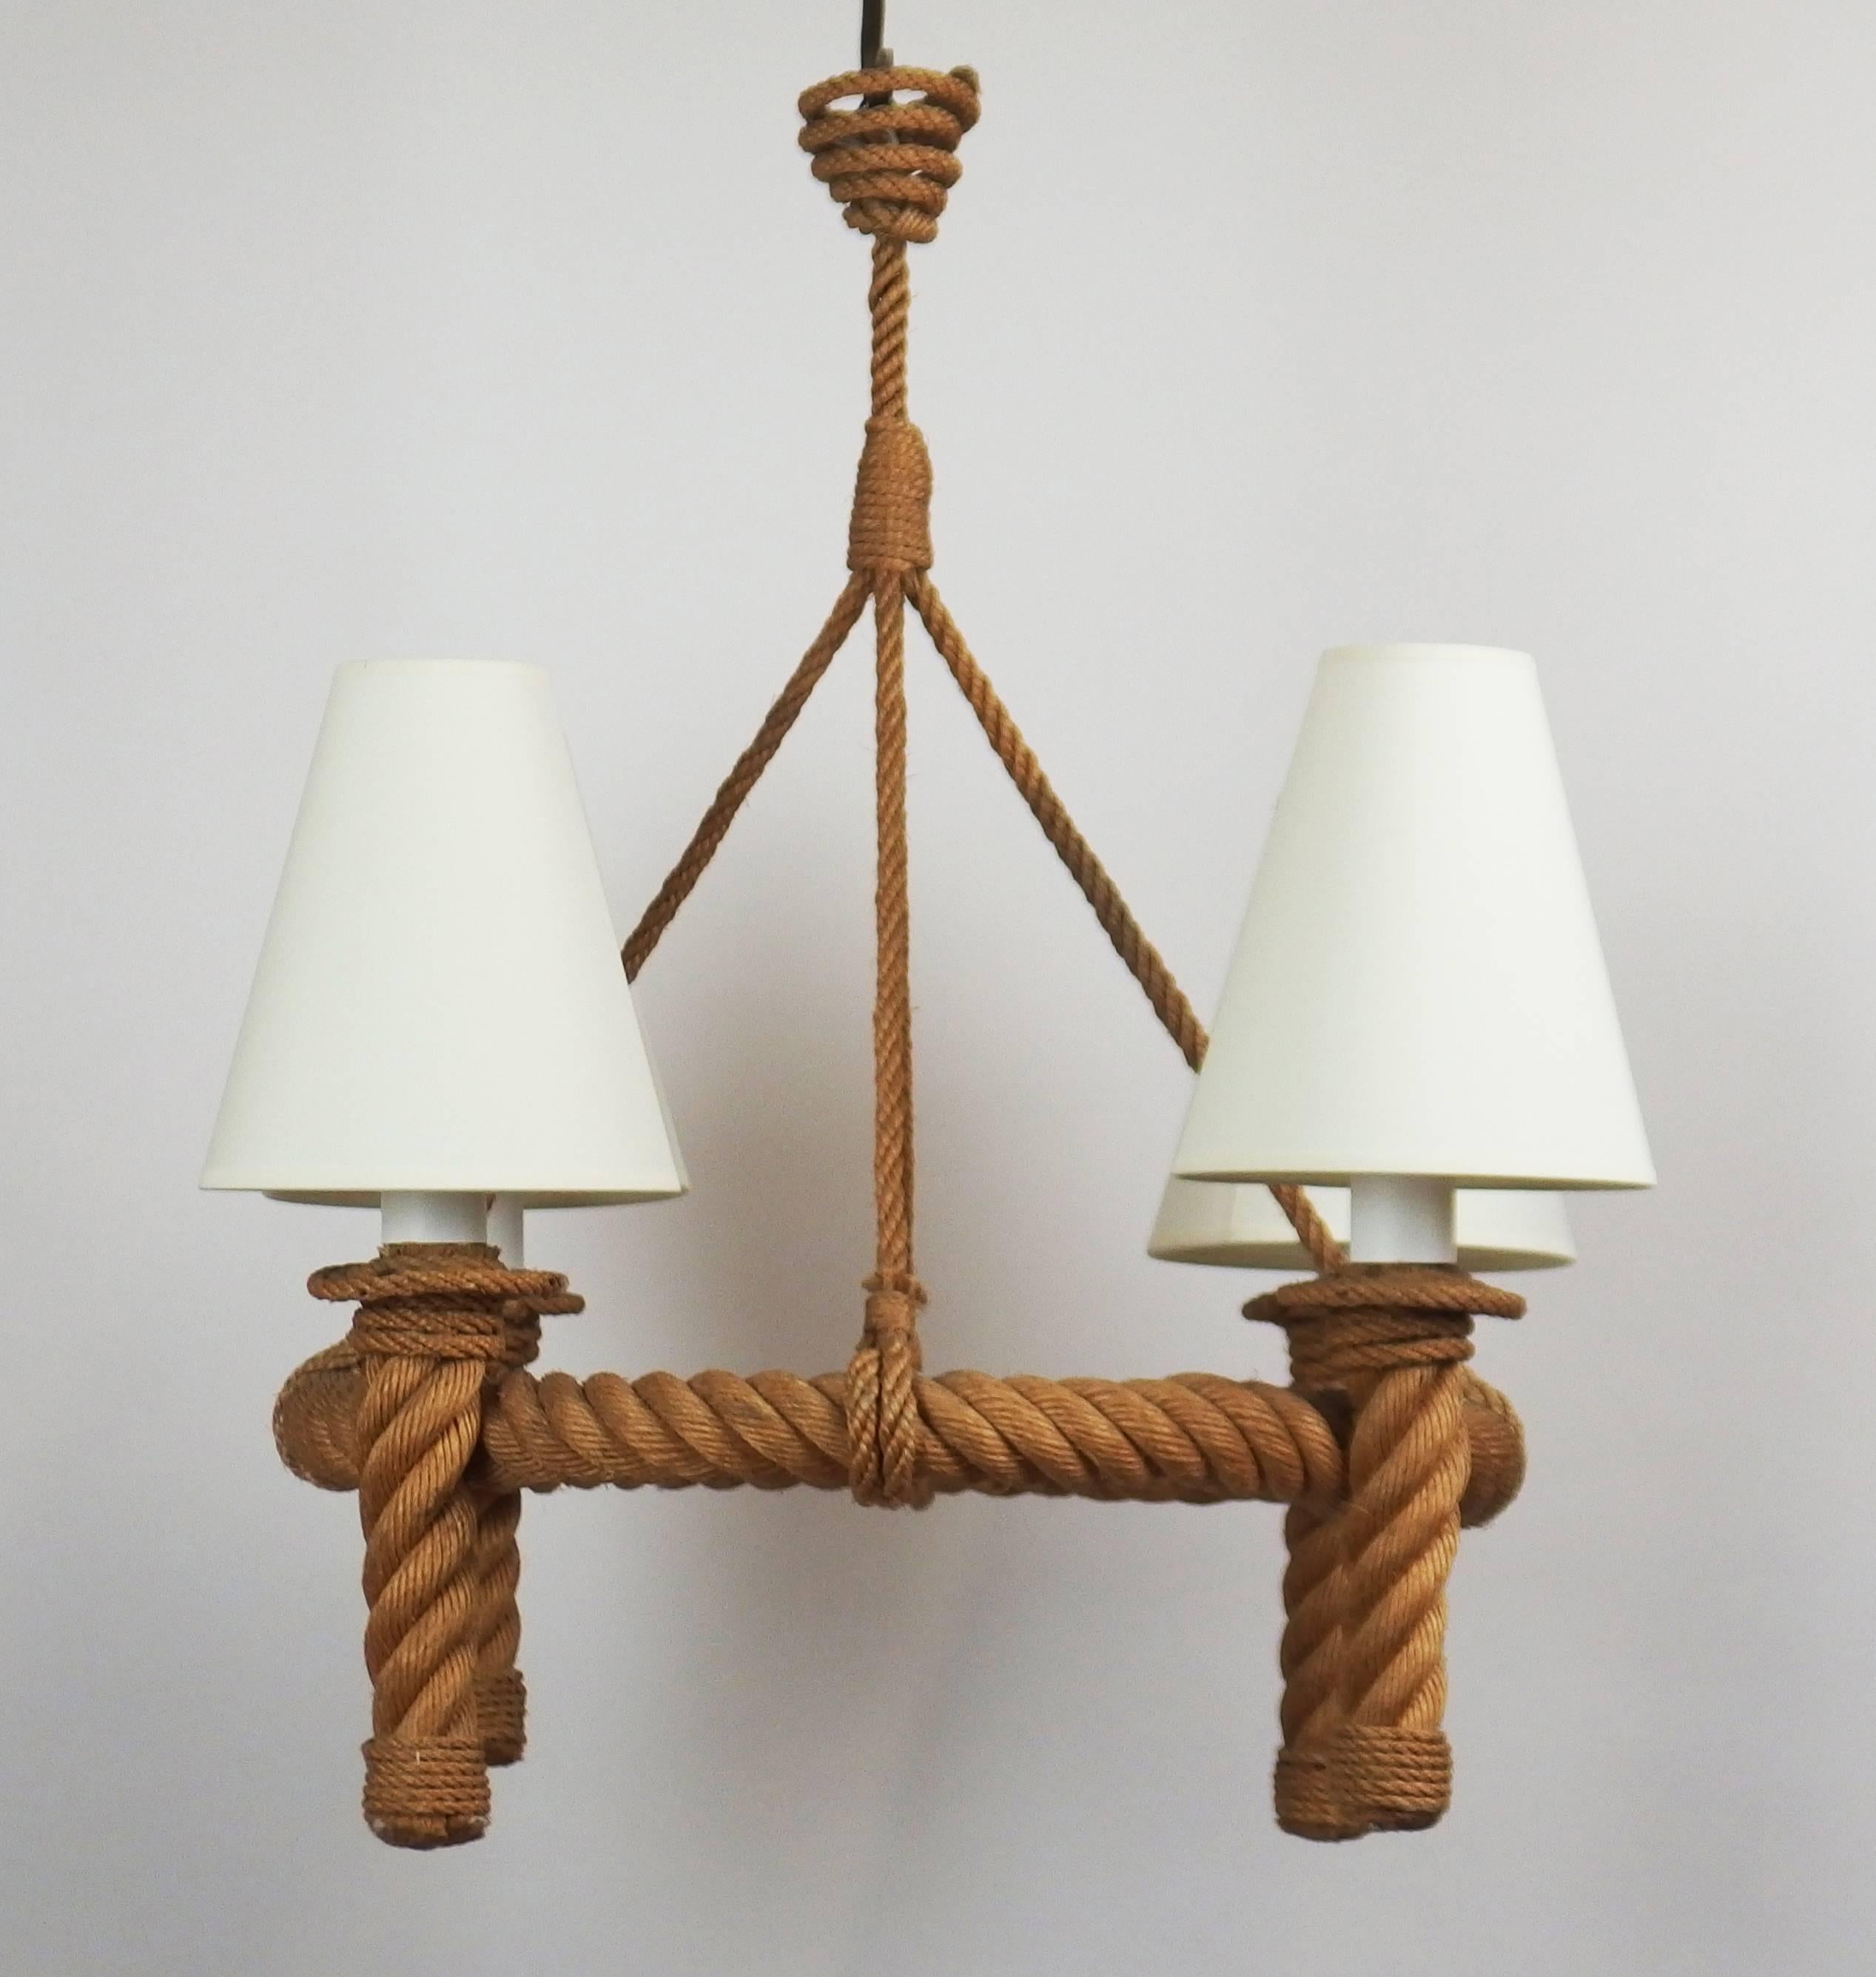 A four-light rope chandelier by Audoux Minet rewired with small screw sockets.
 